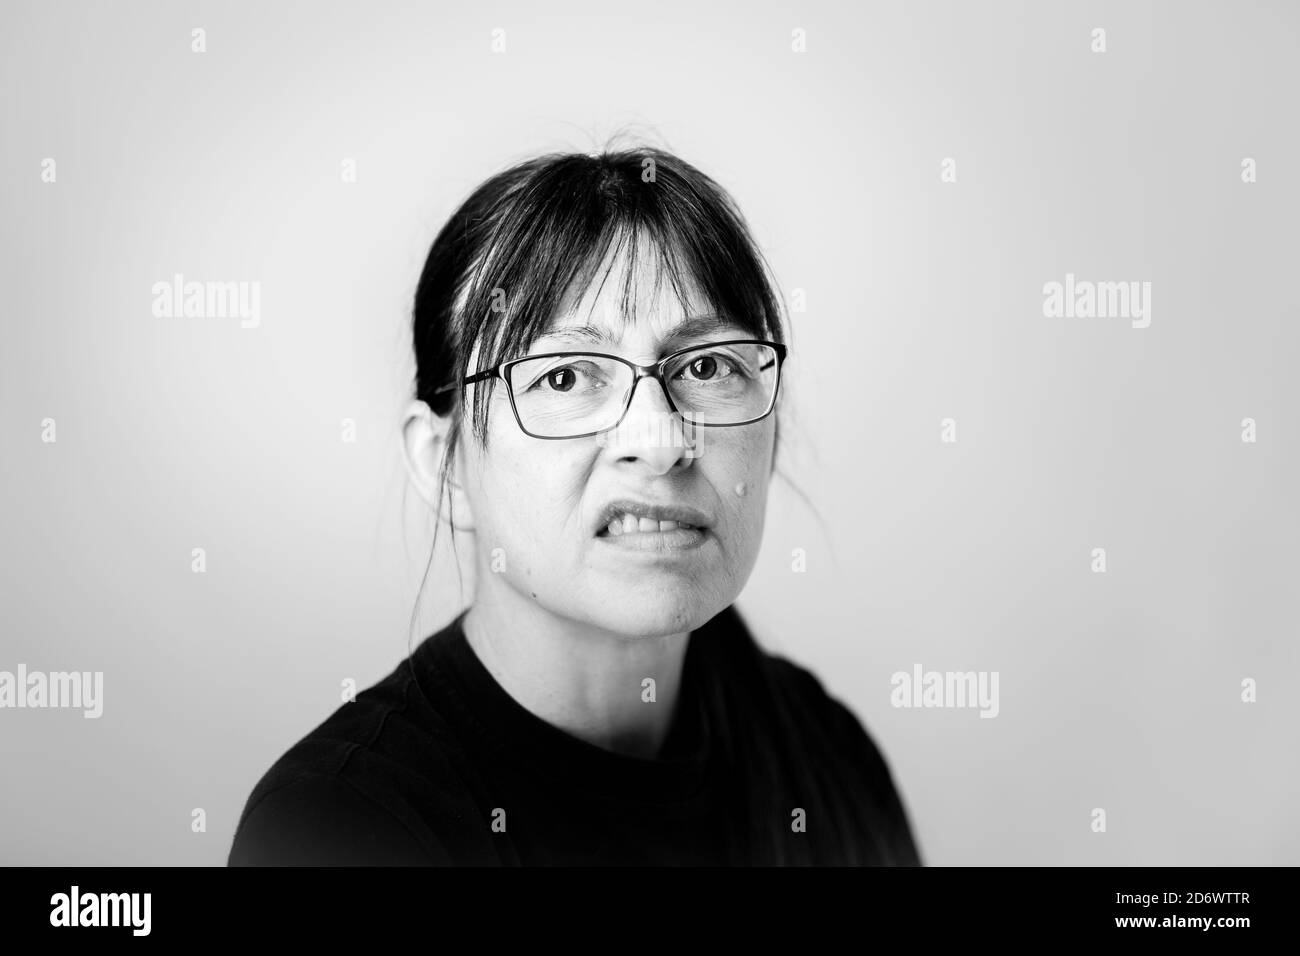 Mono, black & white, front close up of one isolated grumpy woman looking directly at camera snarling, looking fed up, disappointed. Female face snarl. Stock Photo